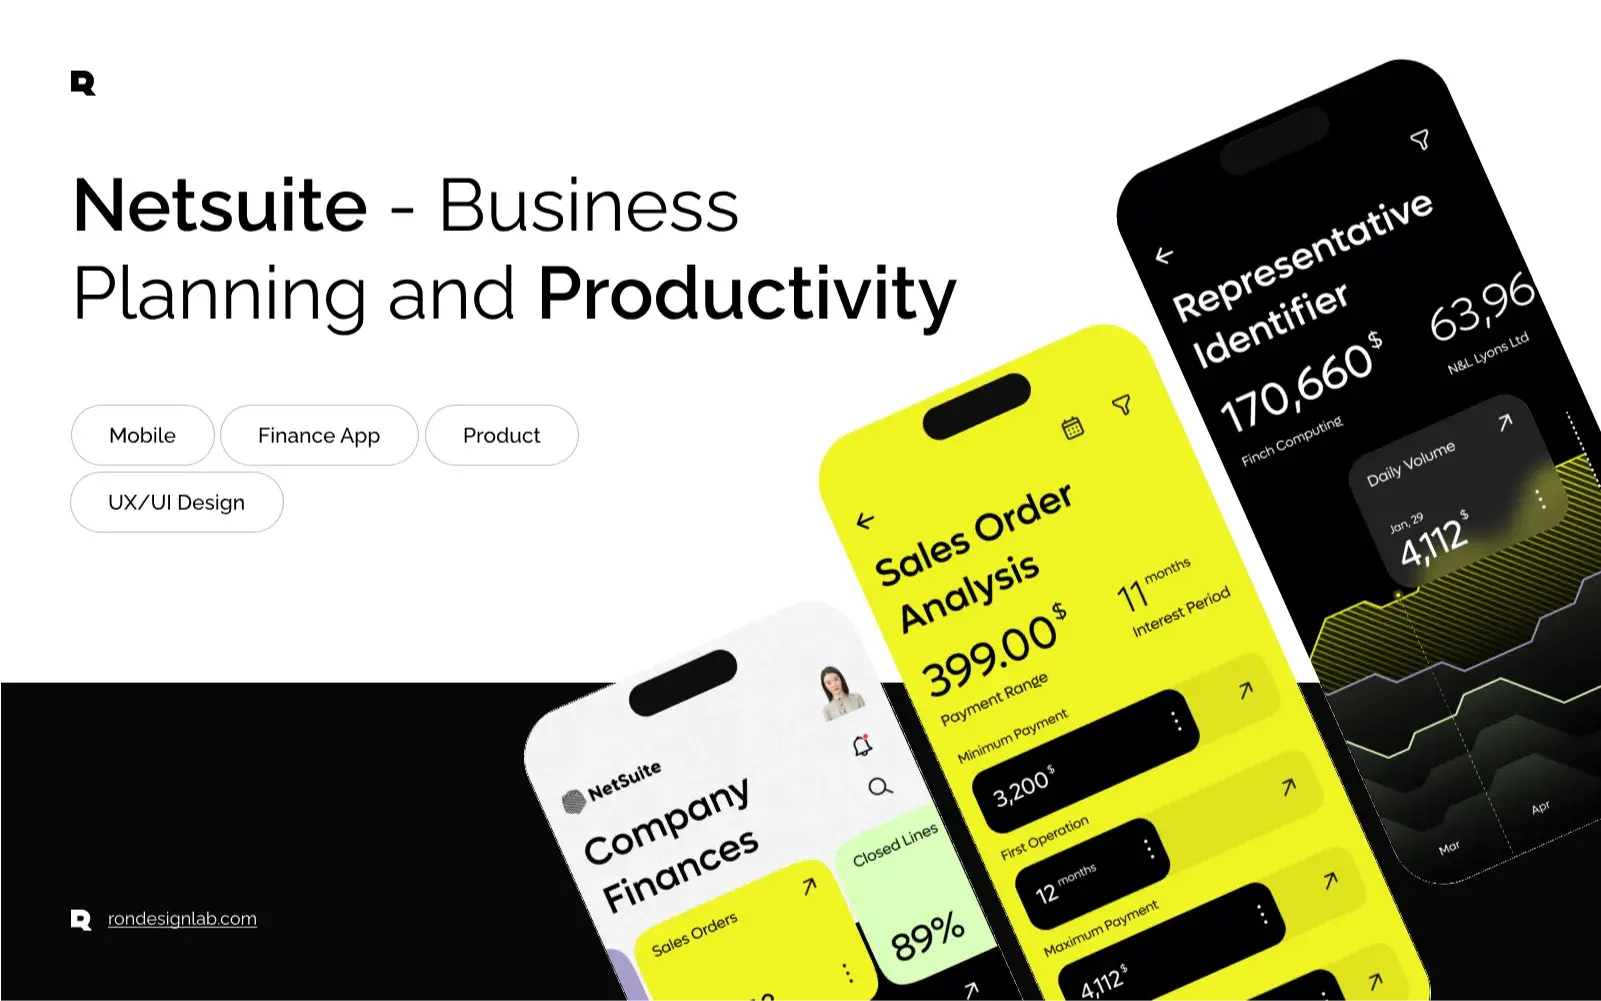 Netsuite - Business Planning and Productivity - Business